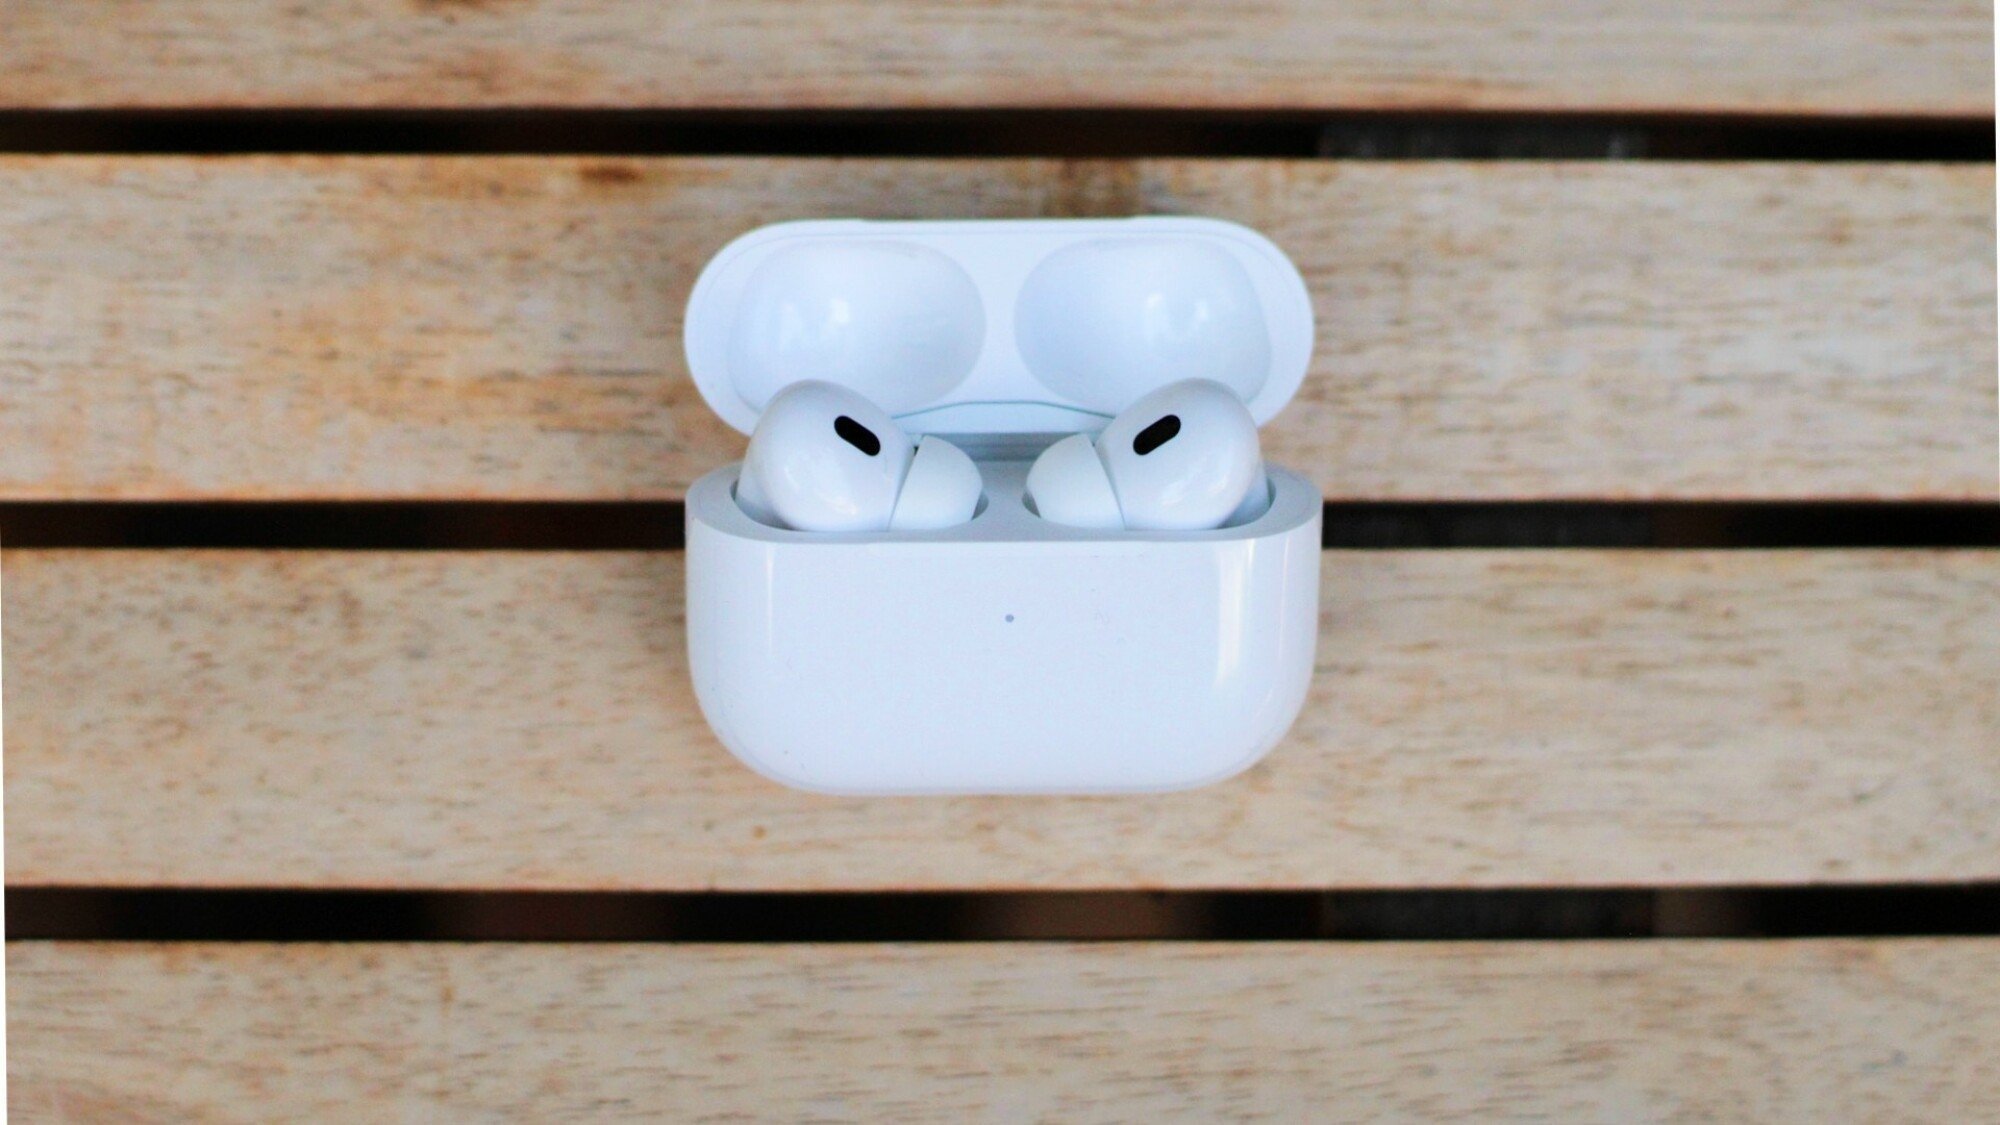 Apple AirPods Pro with USB-C